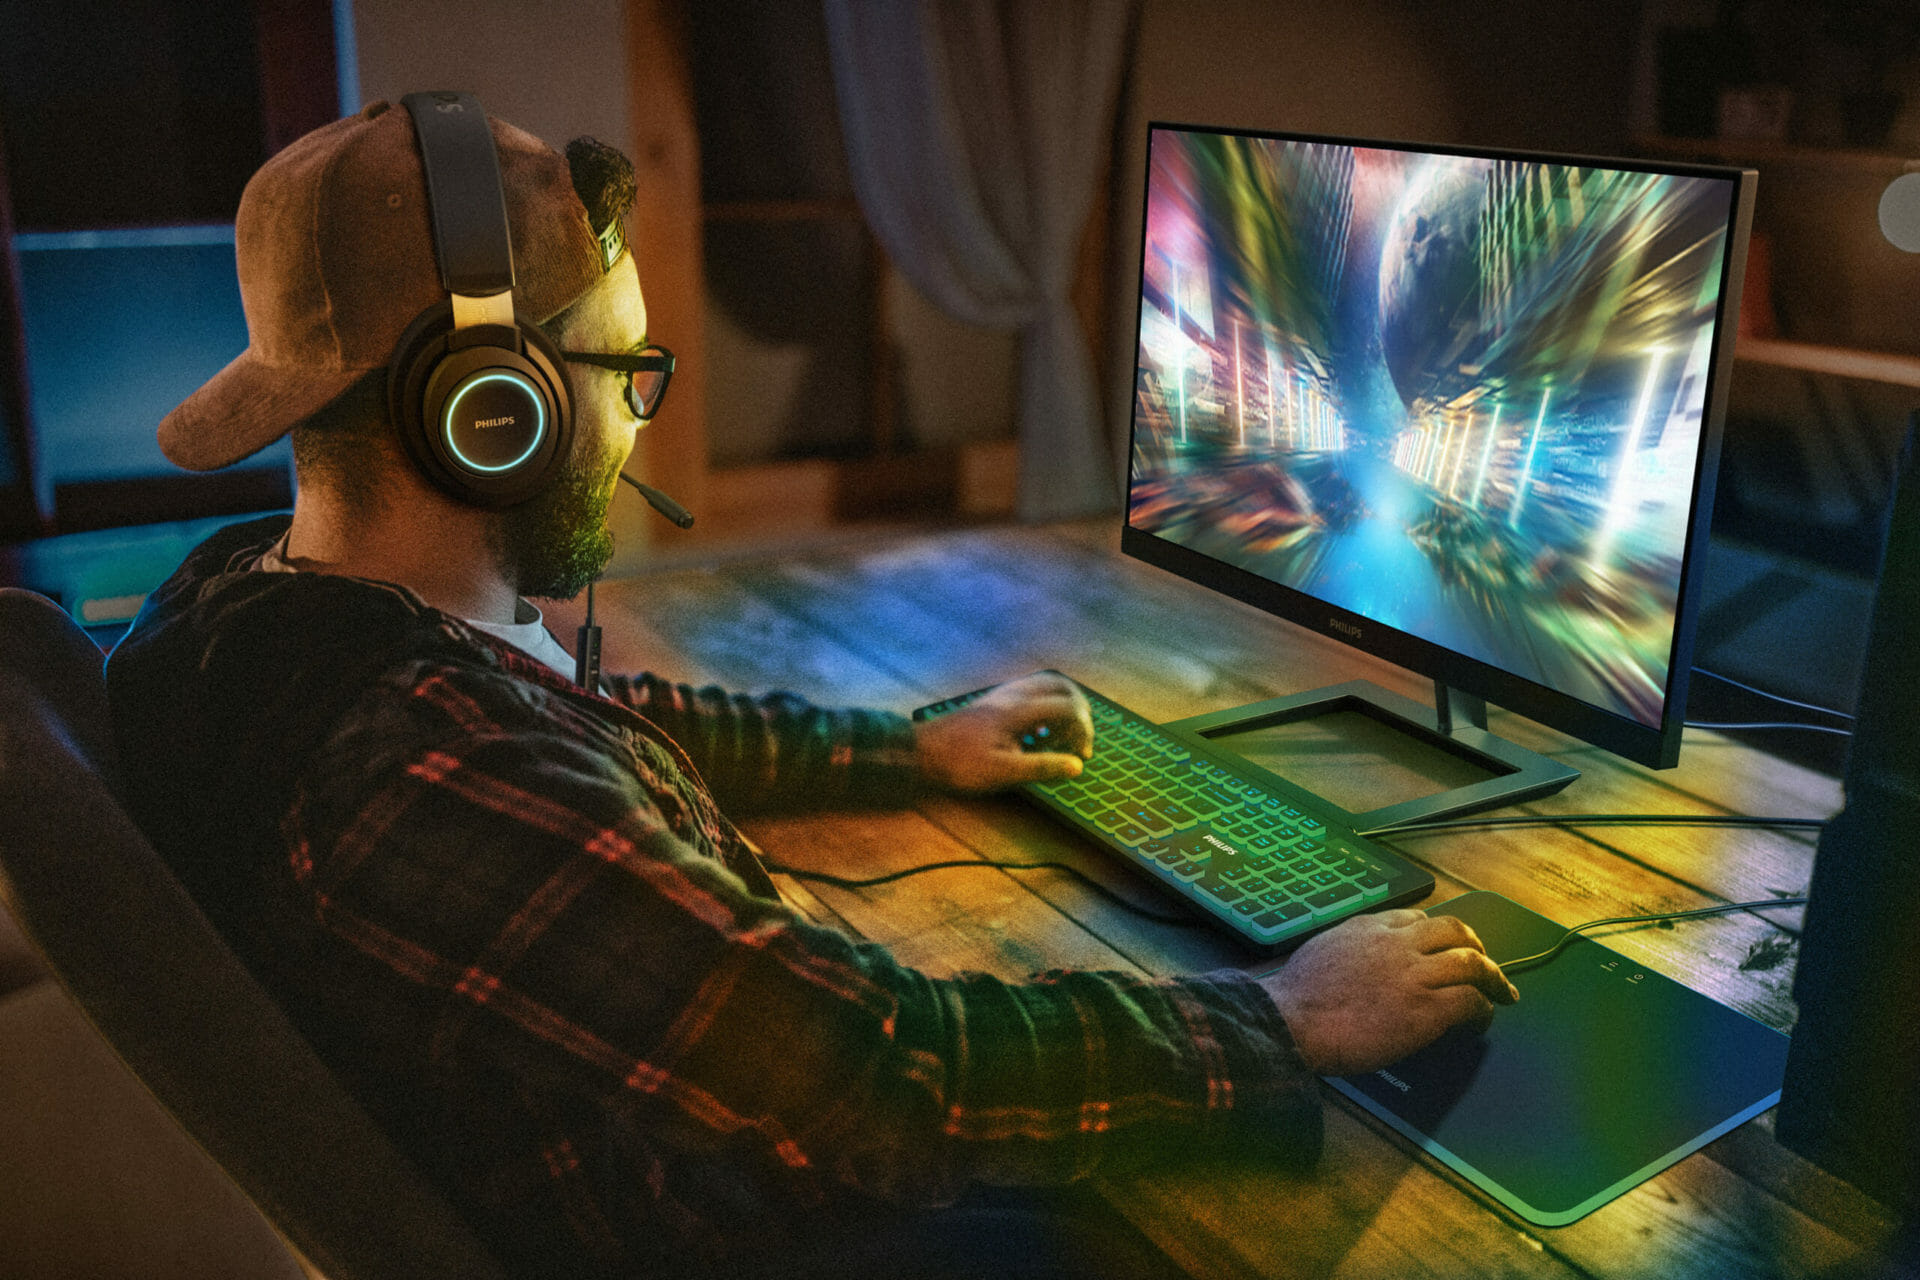 Man with headphones playing a game in front of a philips monitor